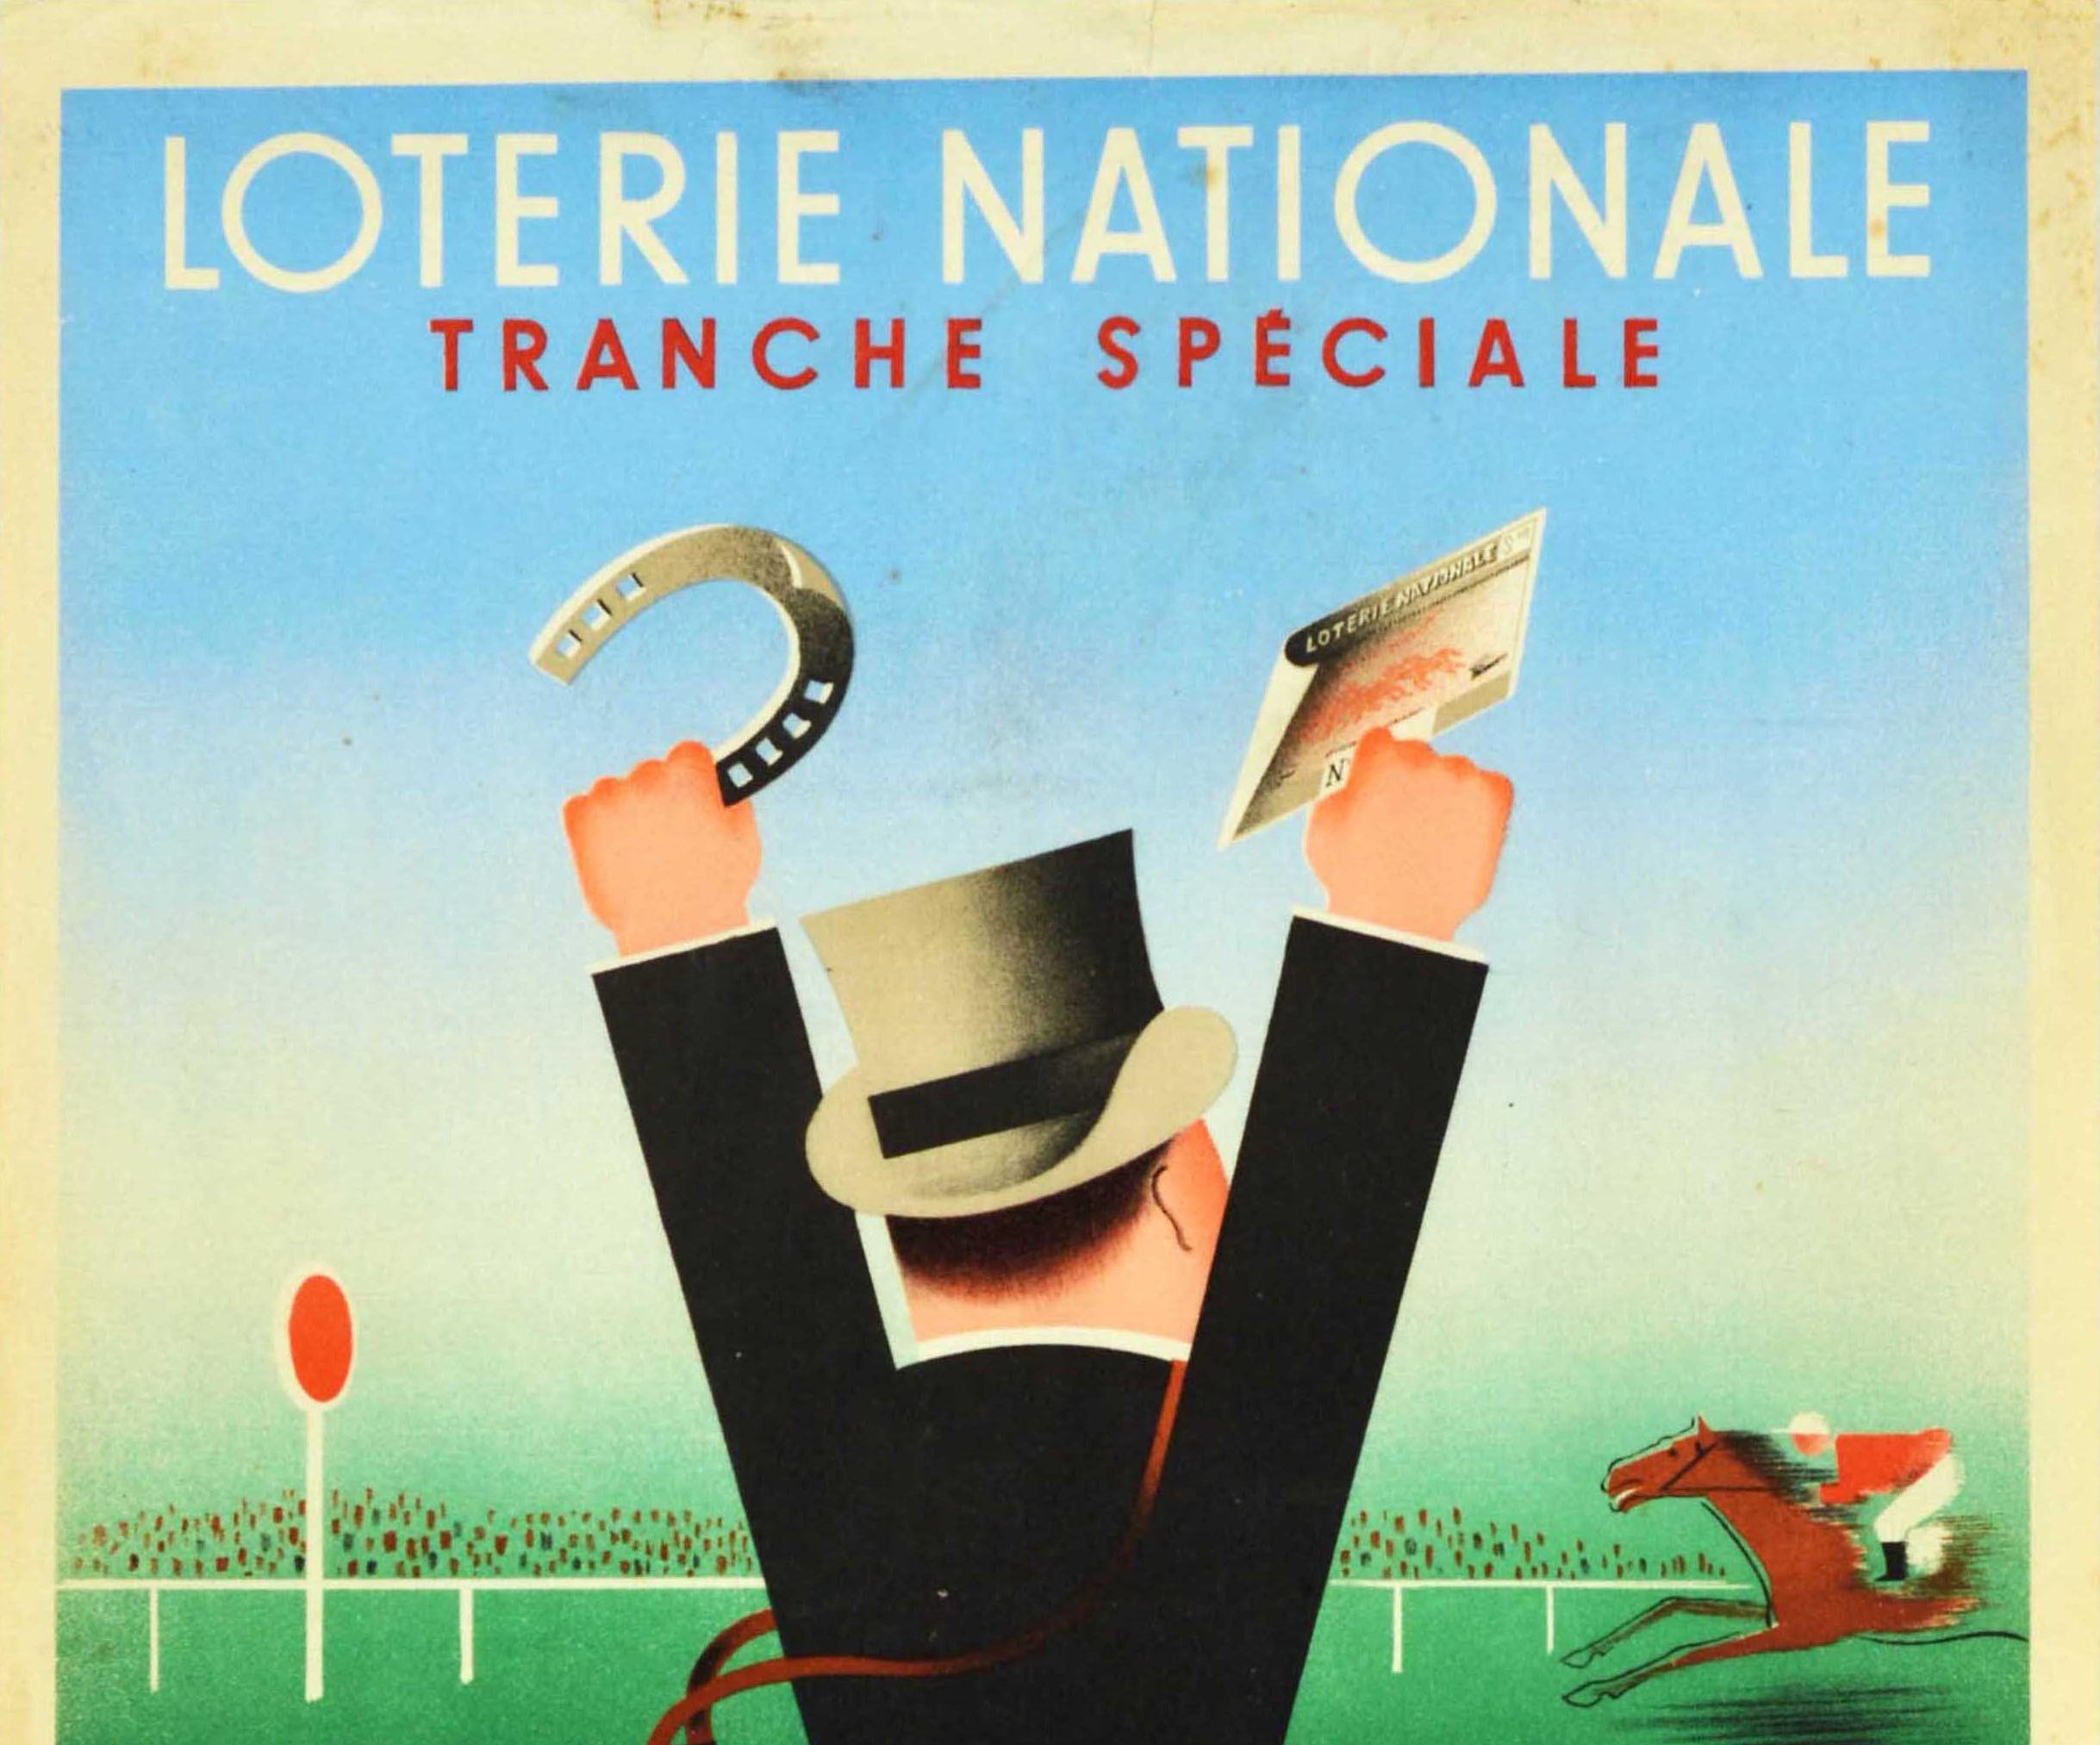 Original Vintage Poster Loterie Nationale Grand Prix Horse Racing Luck Horseshoe - Print by Derouet Grilleres